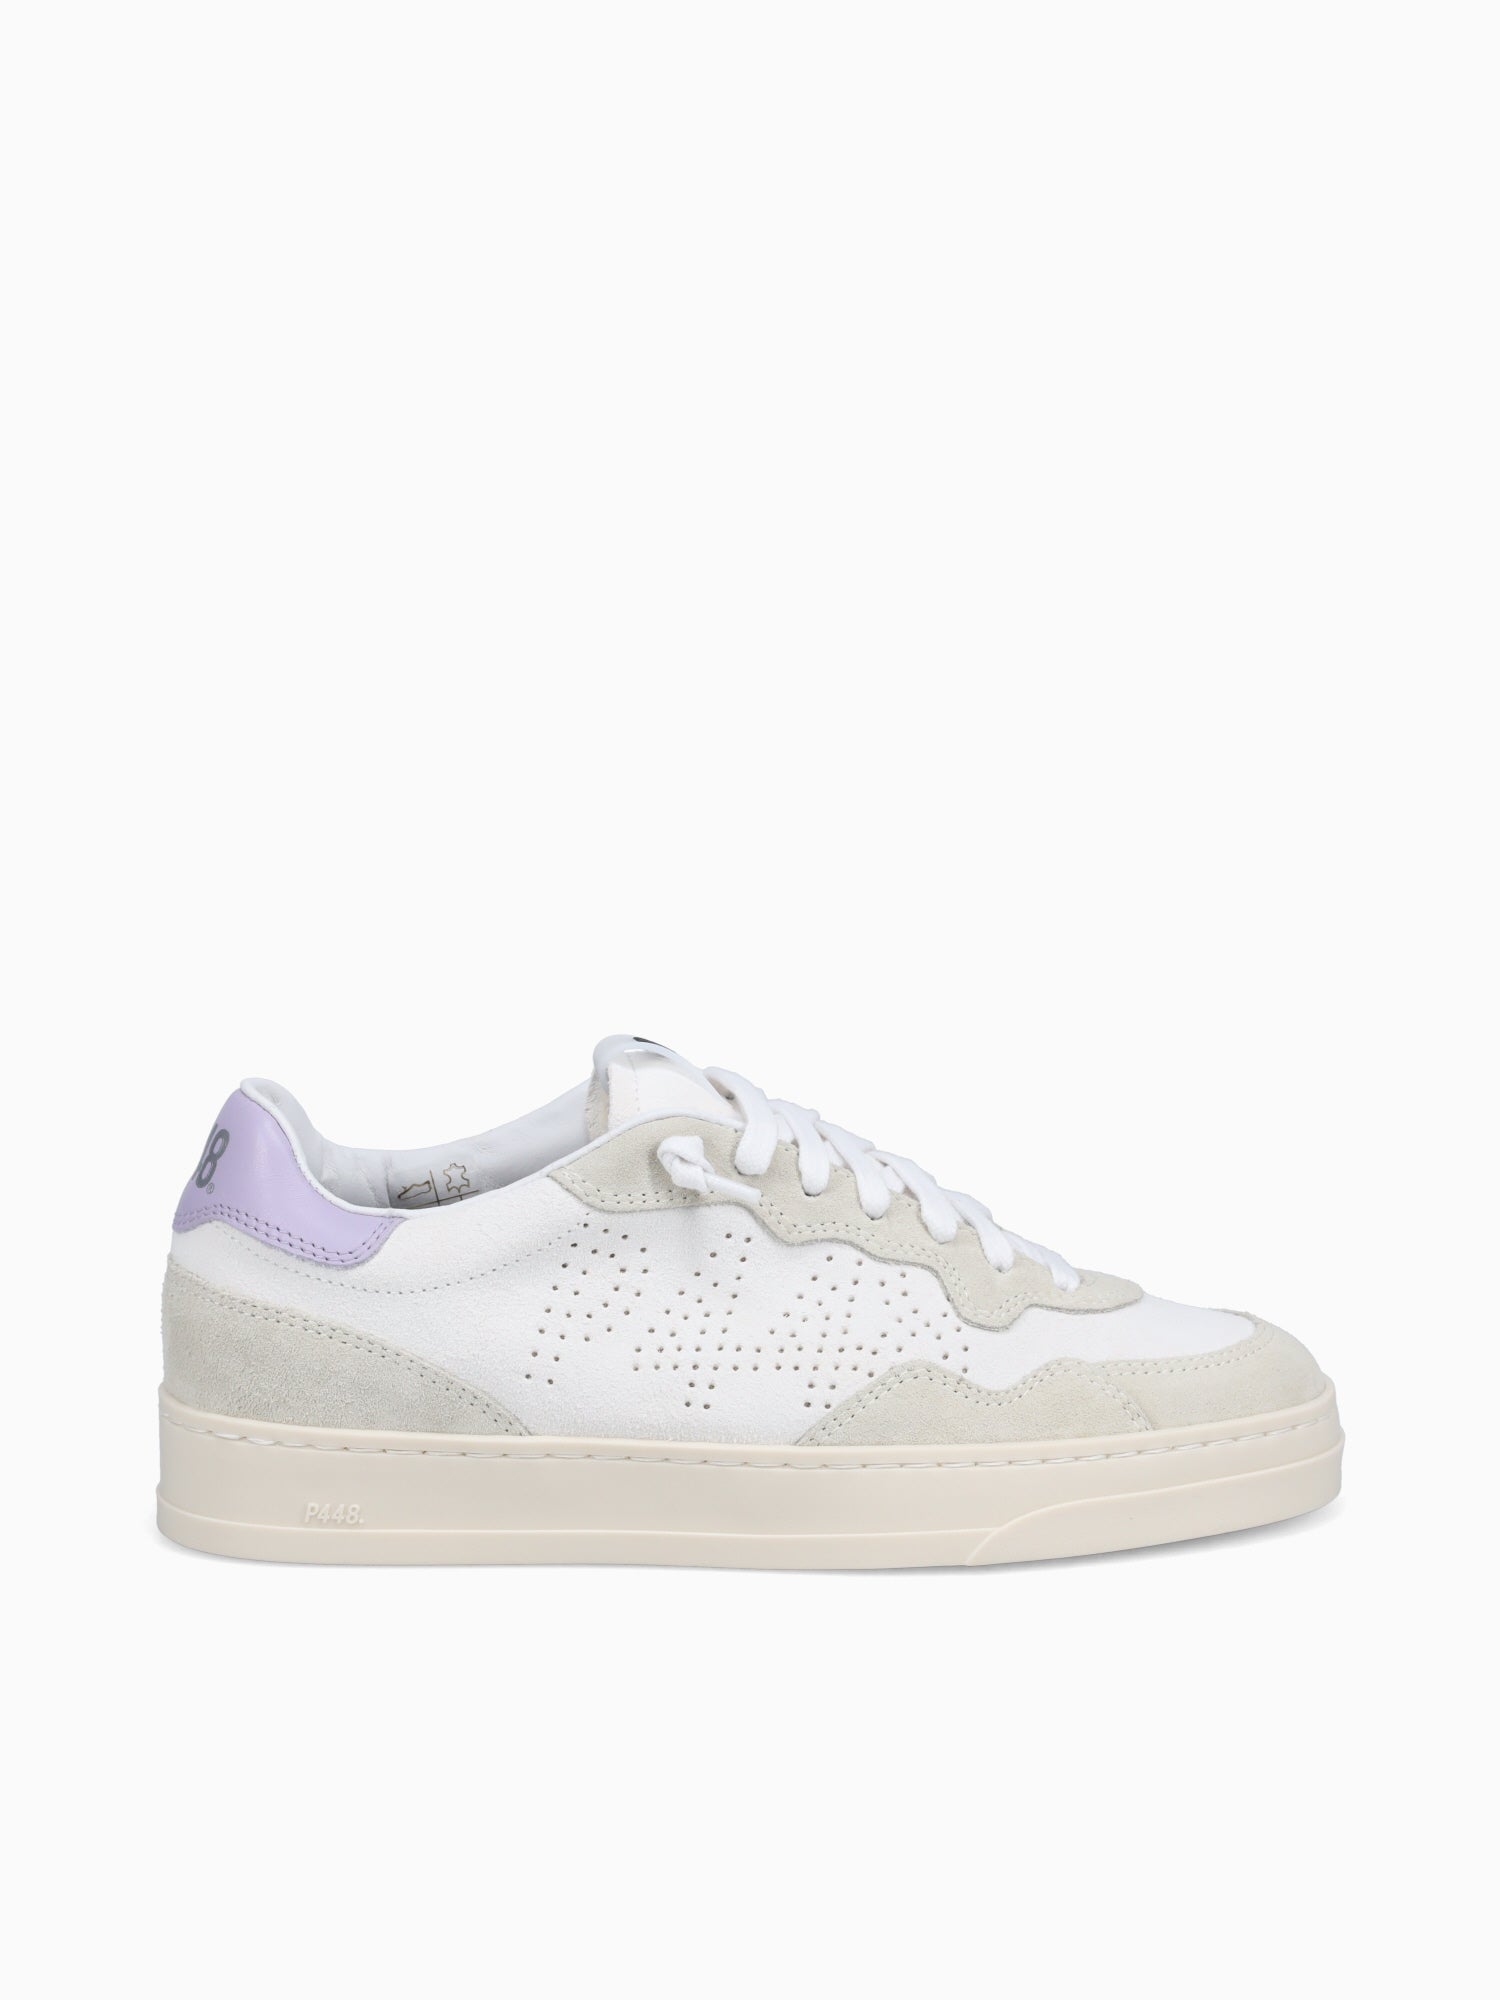 Baliw White Lilac leather White / 36 / M